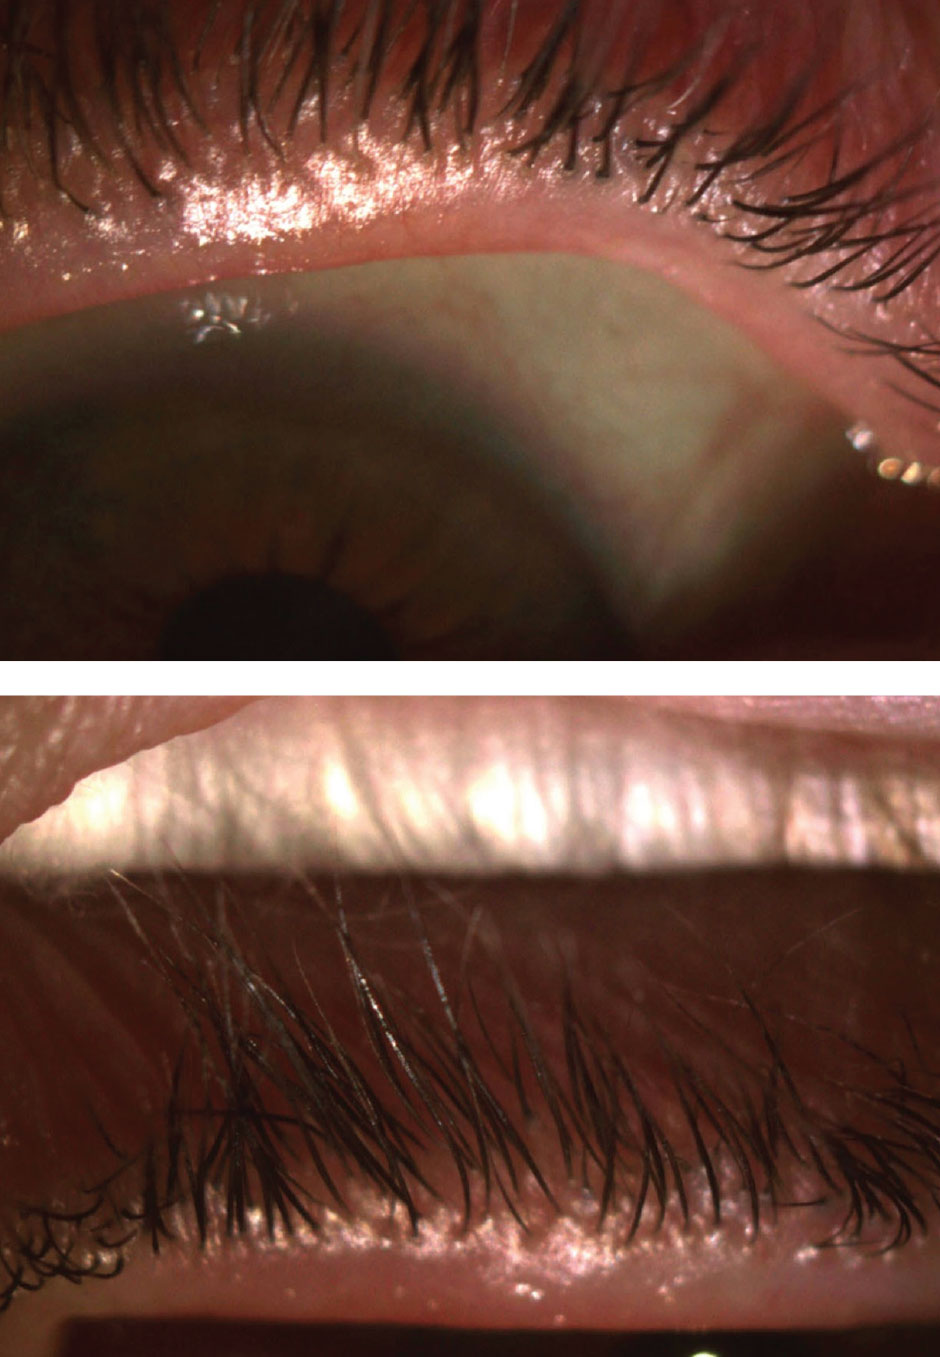 After discontinuing contact lens wear for a week, the patient’s lashes were still pouted (OD on the top).